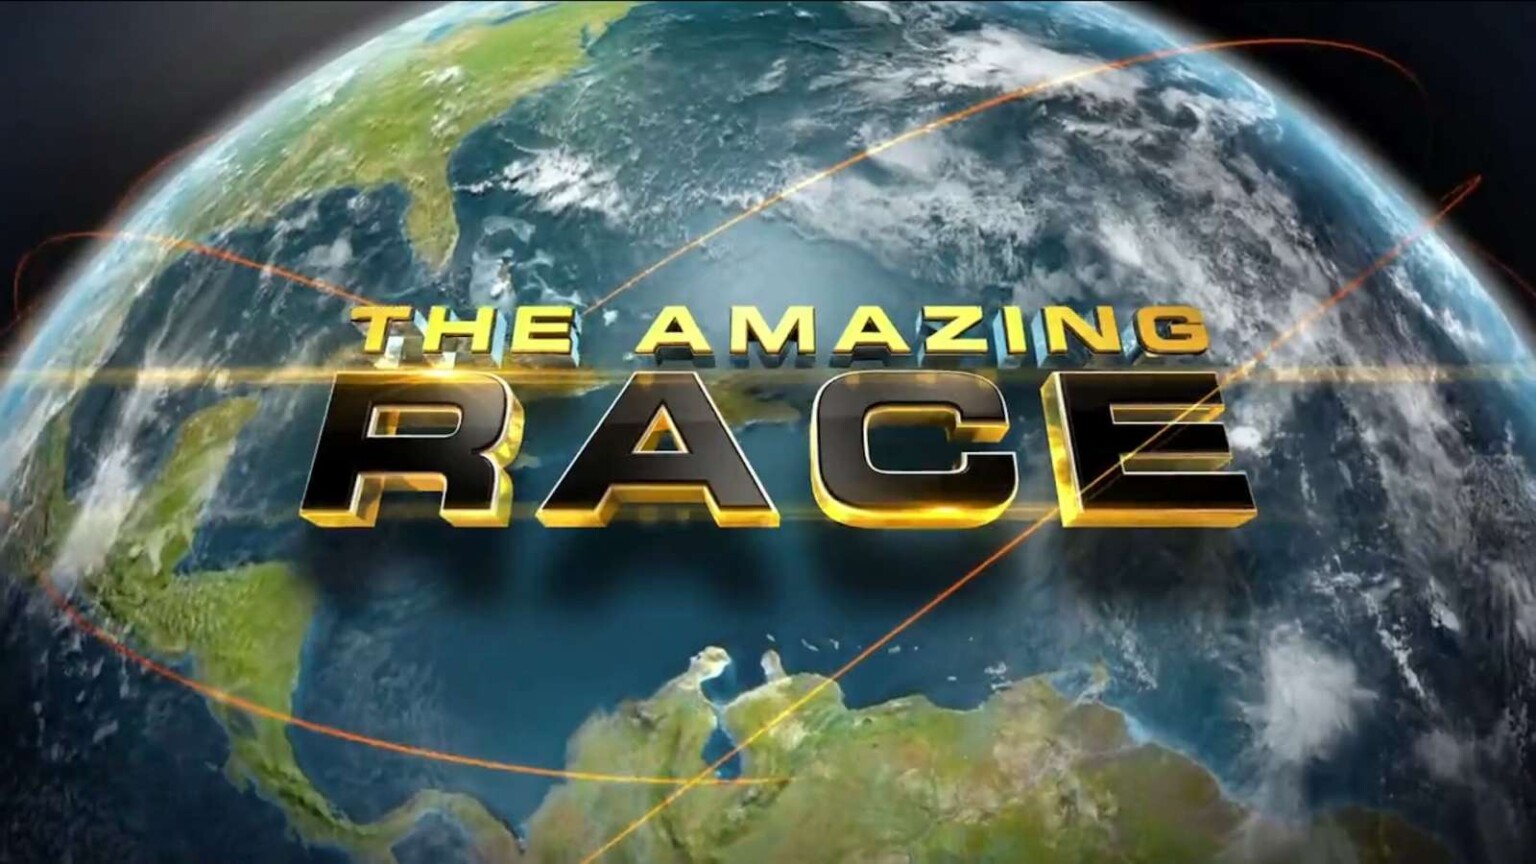 How to Watch 'The Amazing Race' Online Live Stream Season 31